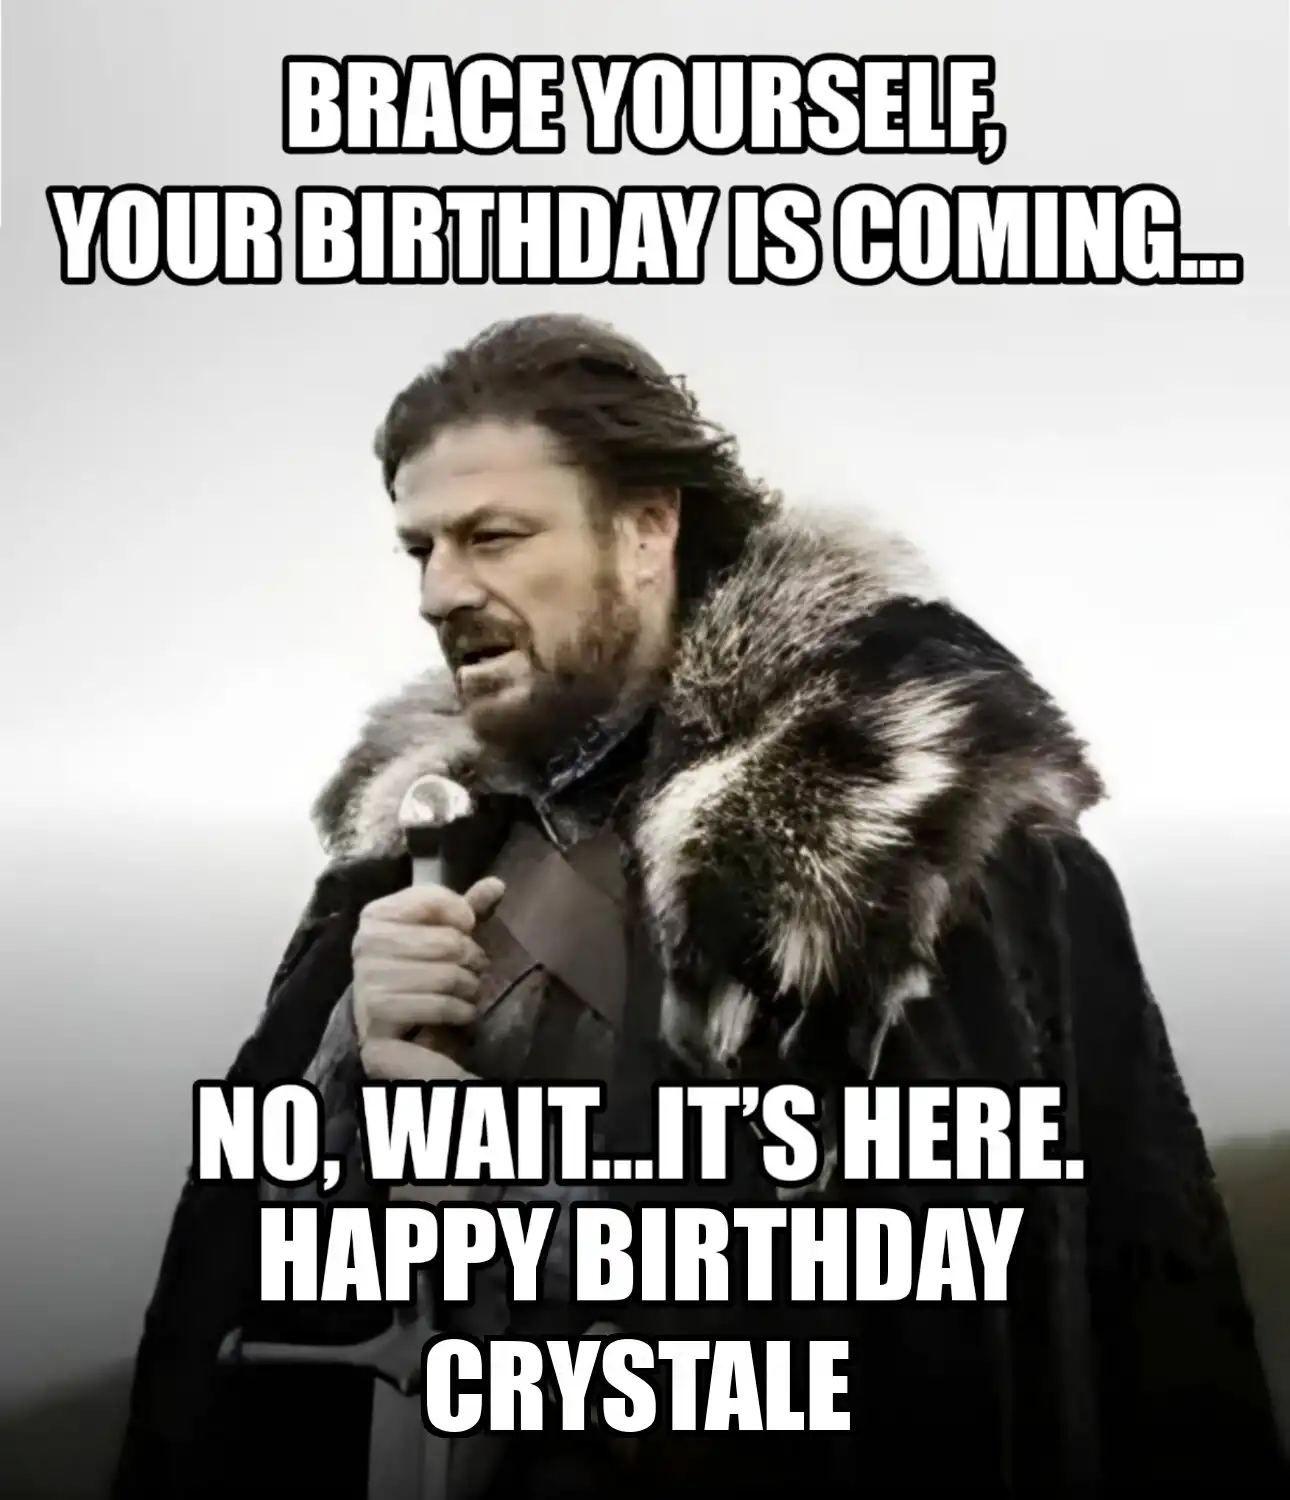 Happy Birthday Crystale Brace Yourself Your Birthday Is Coming Meme